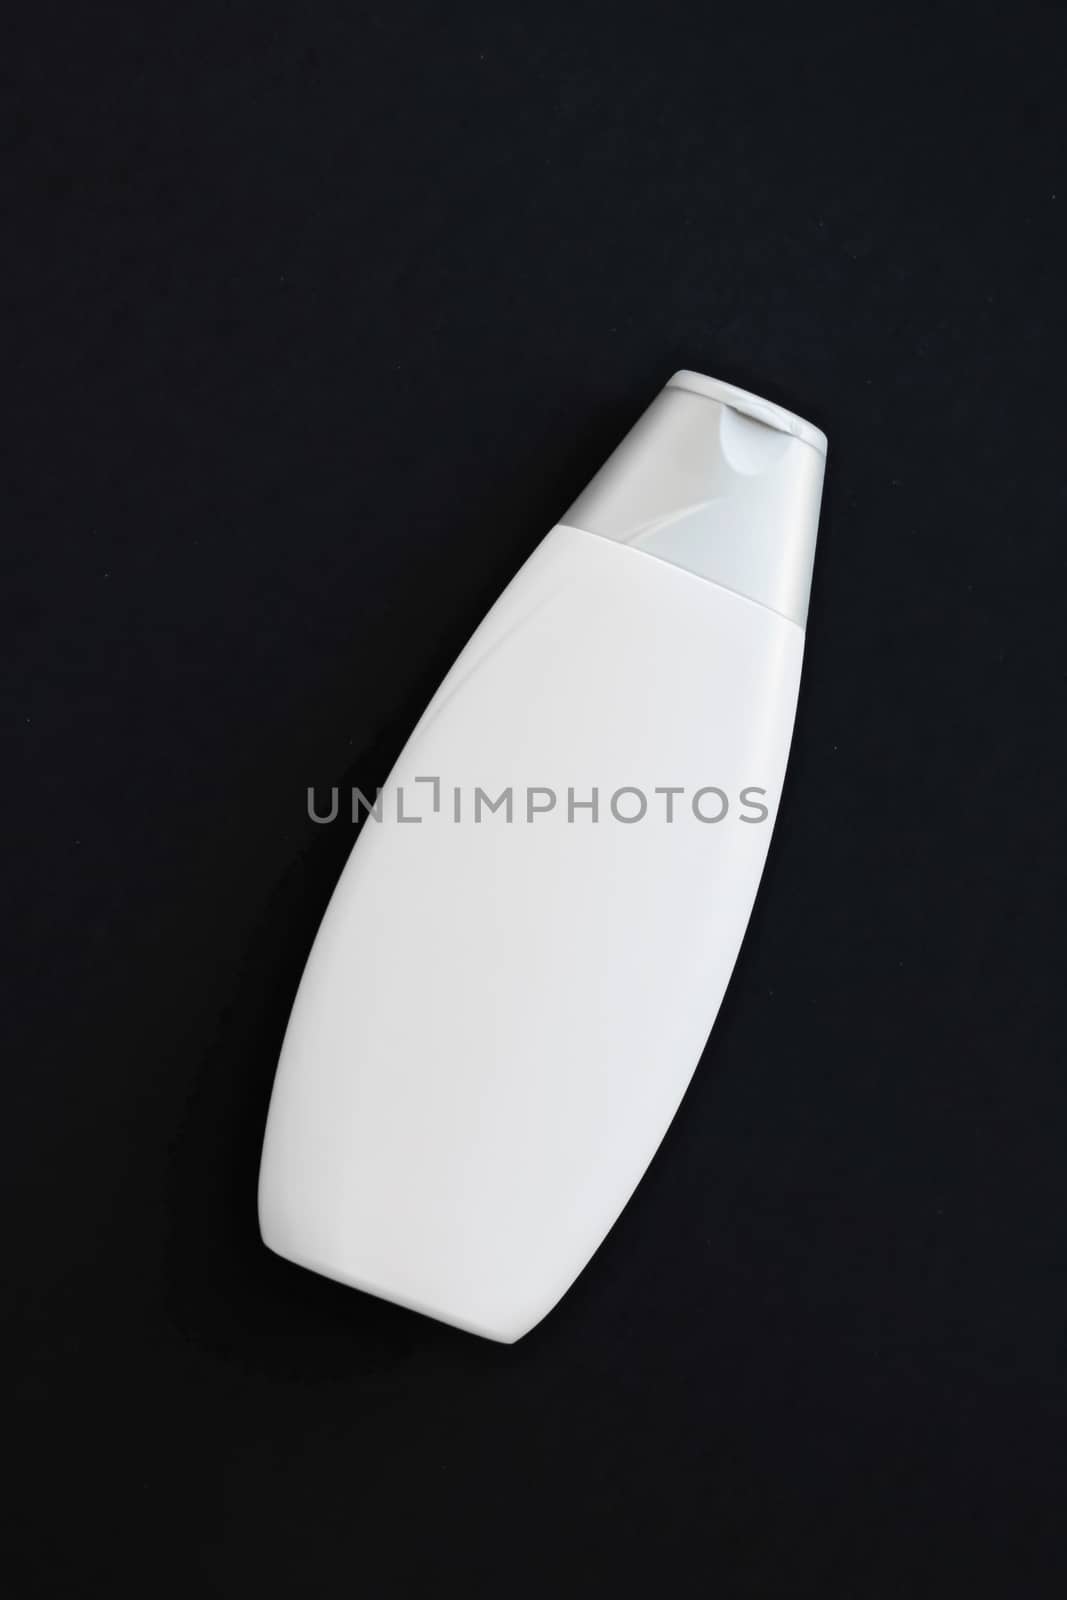 Blank label cosmetic container bottle as product mockup on black background by Anneleven